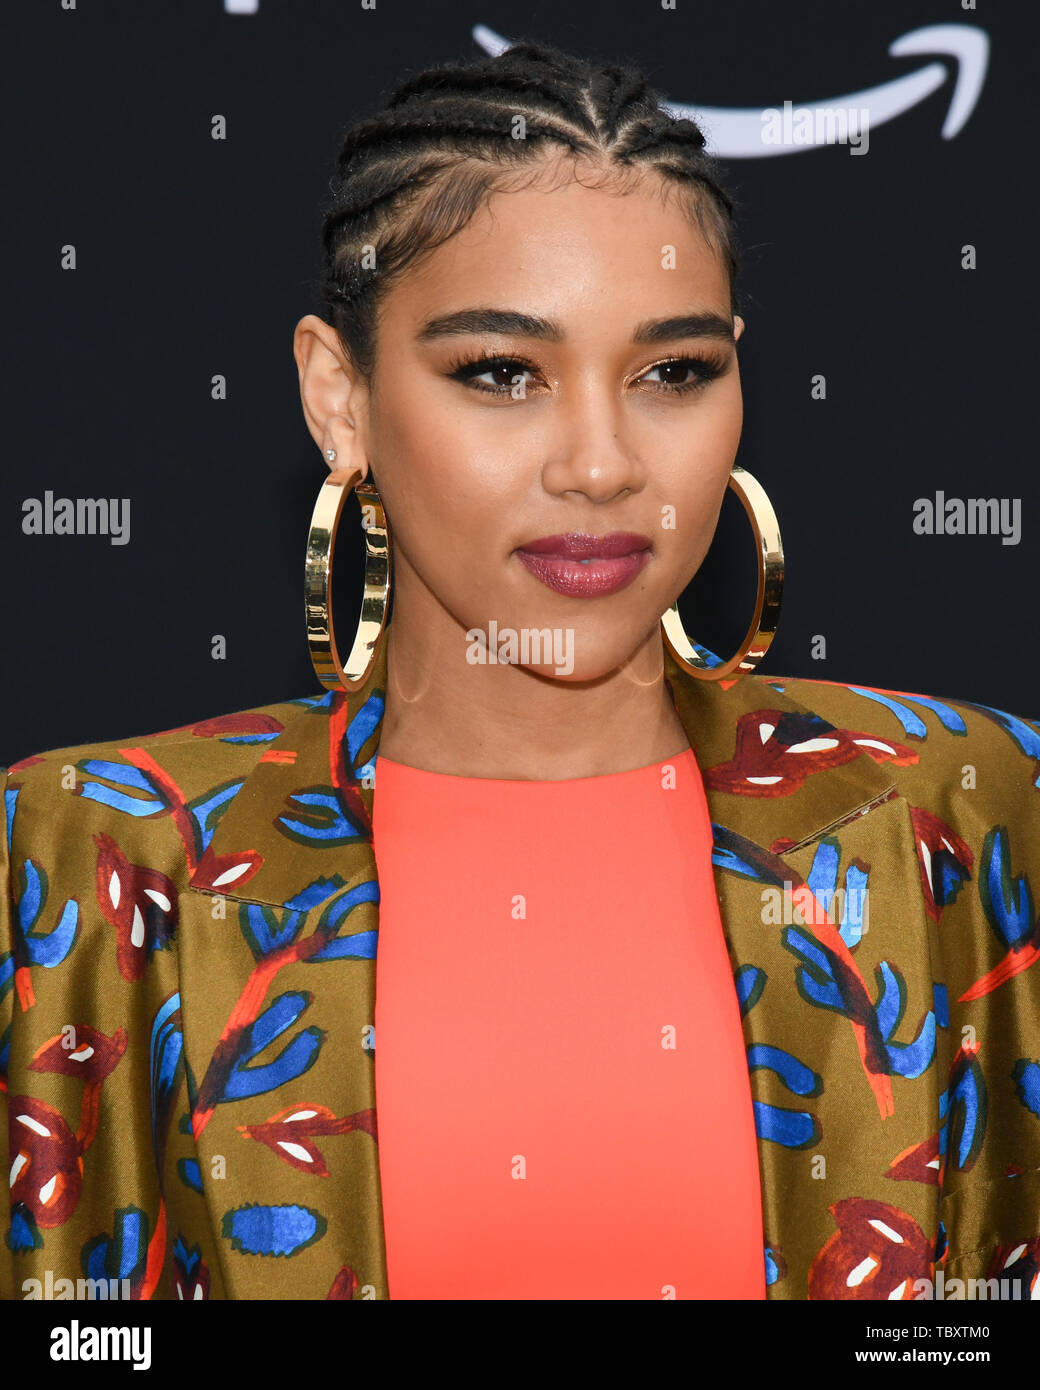 June 3, 2019 - Westwood, California, USA - 02, June 2019 - Westwood Village, California. Alexandra Shipp attends Premiere Of Amazon Prime Video's 'Chasing Happiness' at the Regency Village Bruin Theatre. (Credit Image: © Billy Bennight/ZUMA Wire) Stock Photo